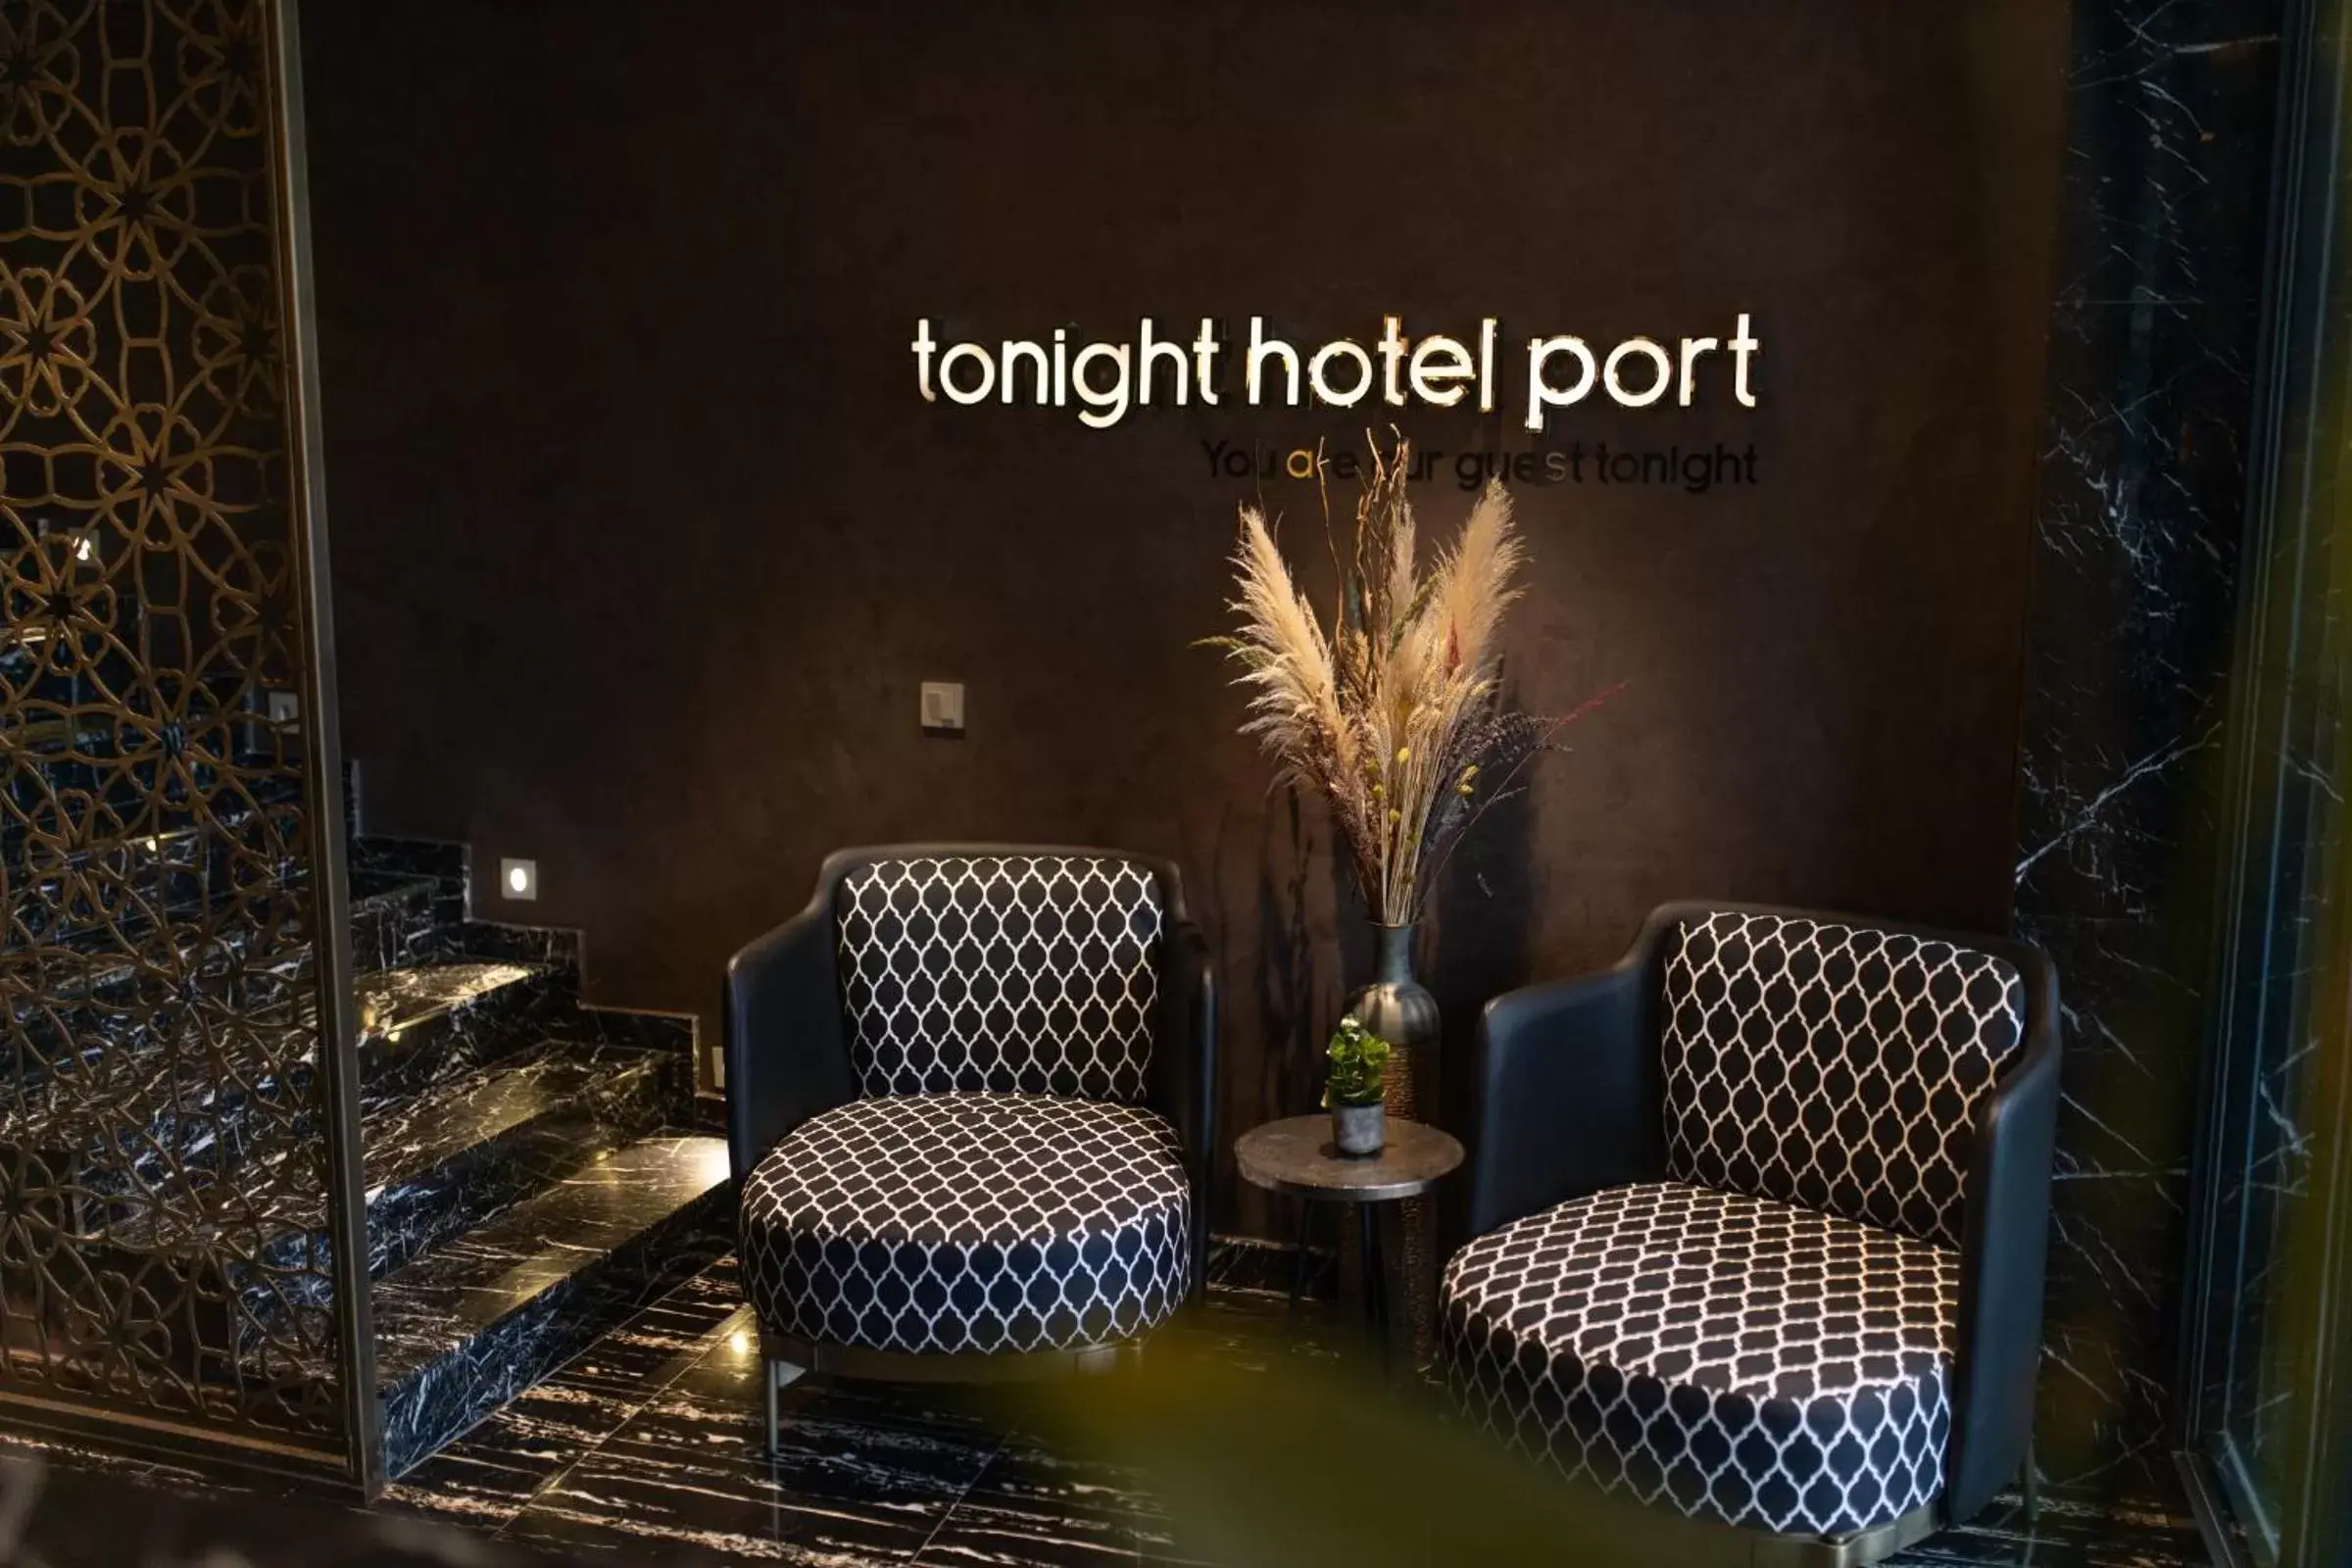 Property logo or sign, Seating Area in Tonight Hotel Port